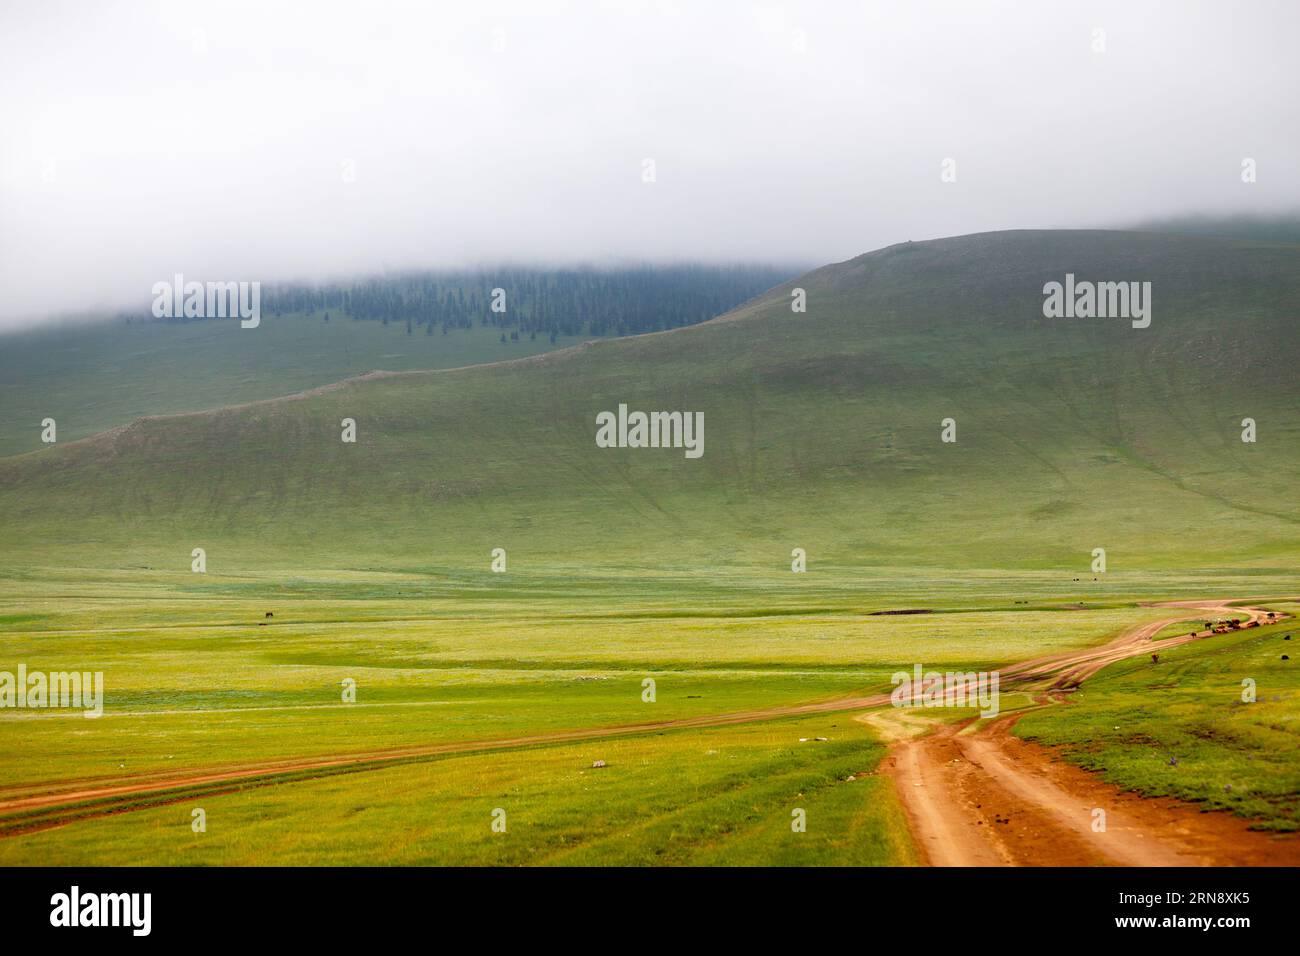 Dirt road heading to the foggy hill in the Orkhon valley in Mongolia. Stock Photo